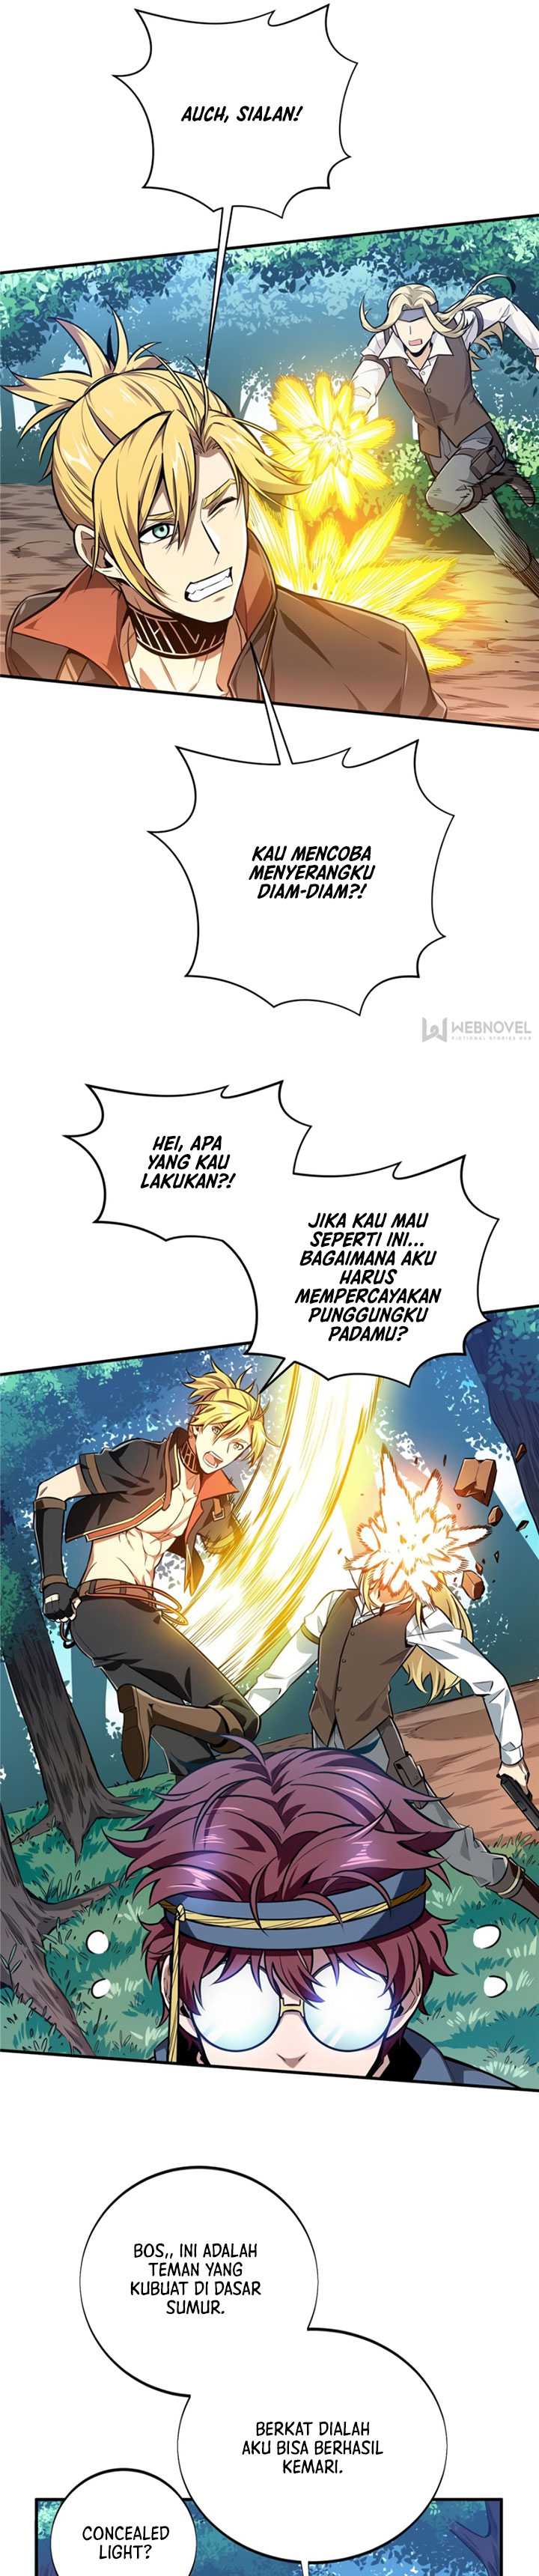 The King’s Avatar Chapter 90